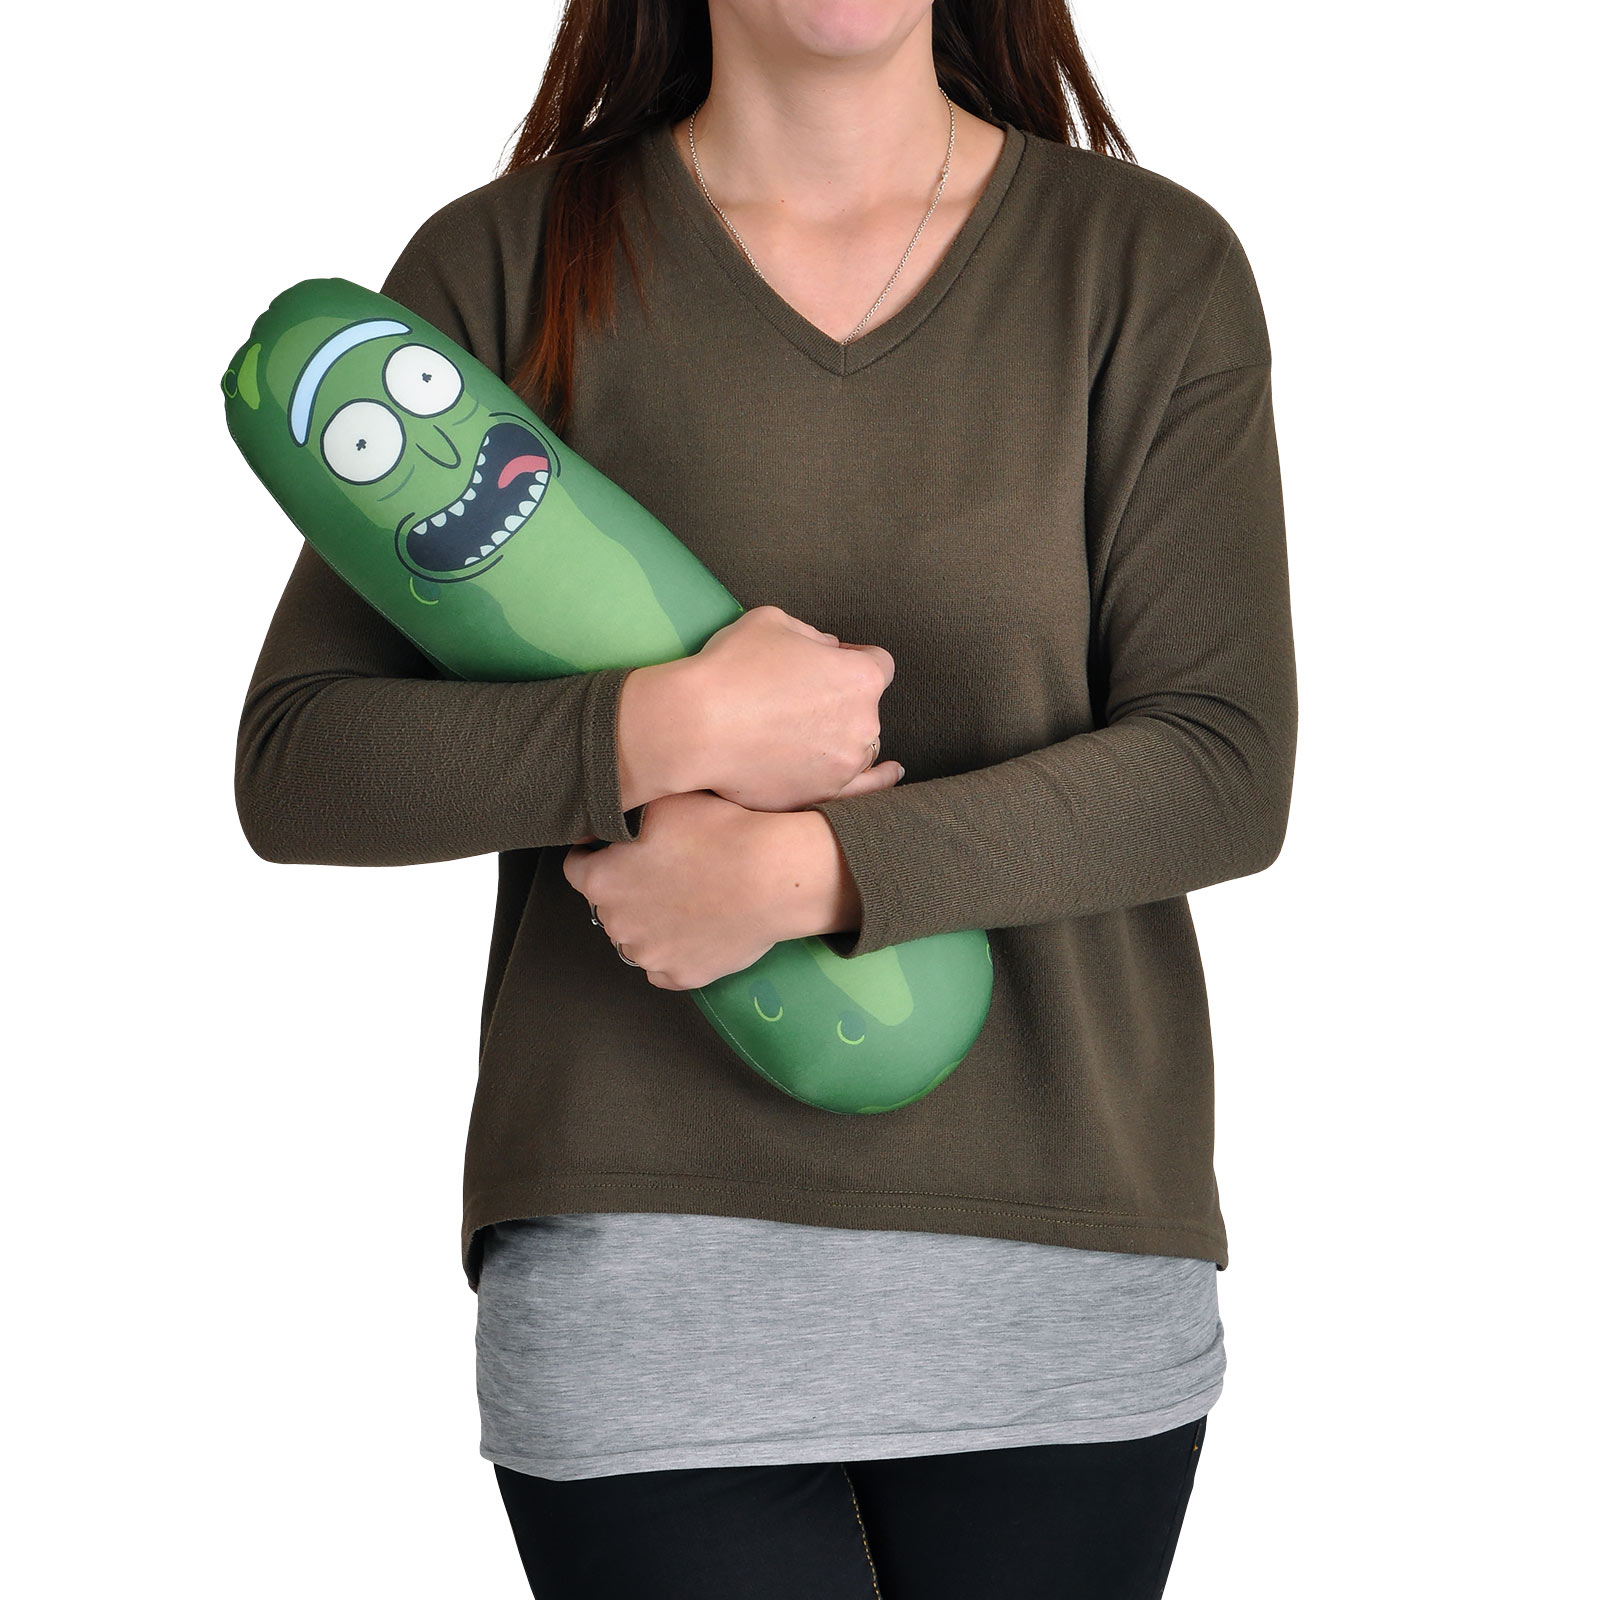 Rick and Morty - Pickle Rick Pillow